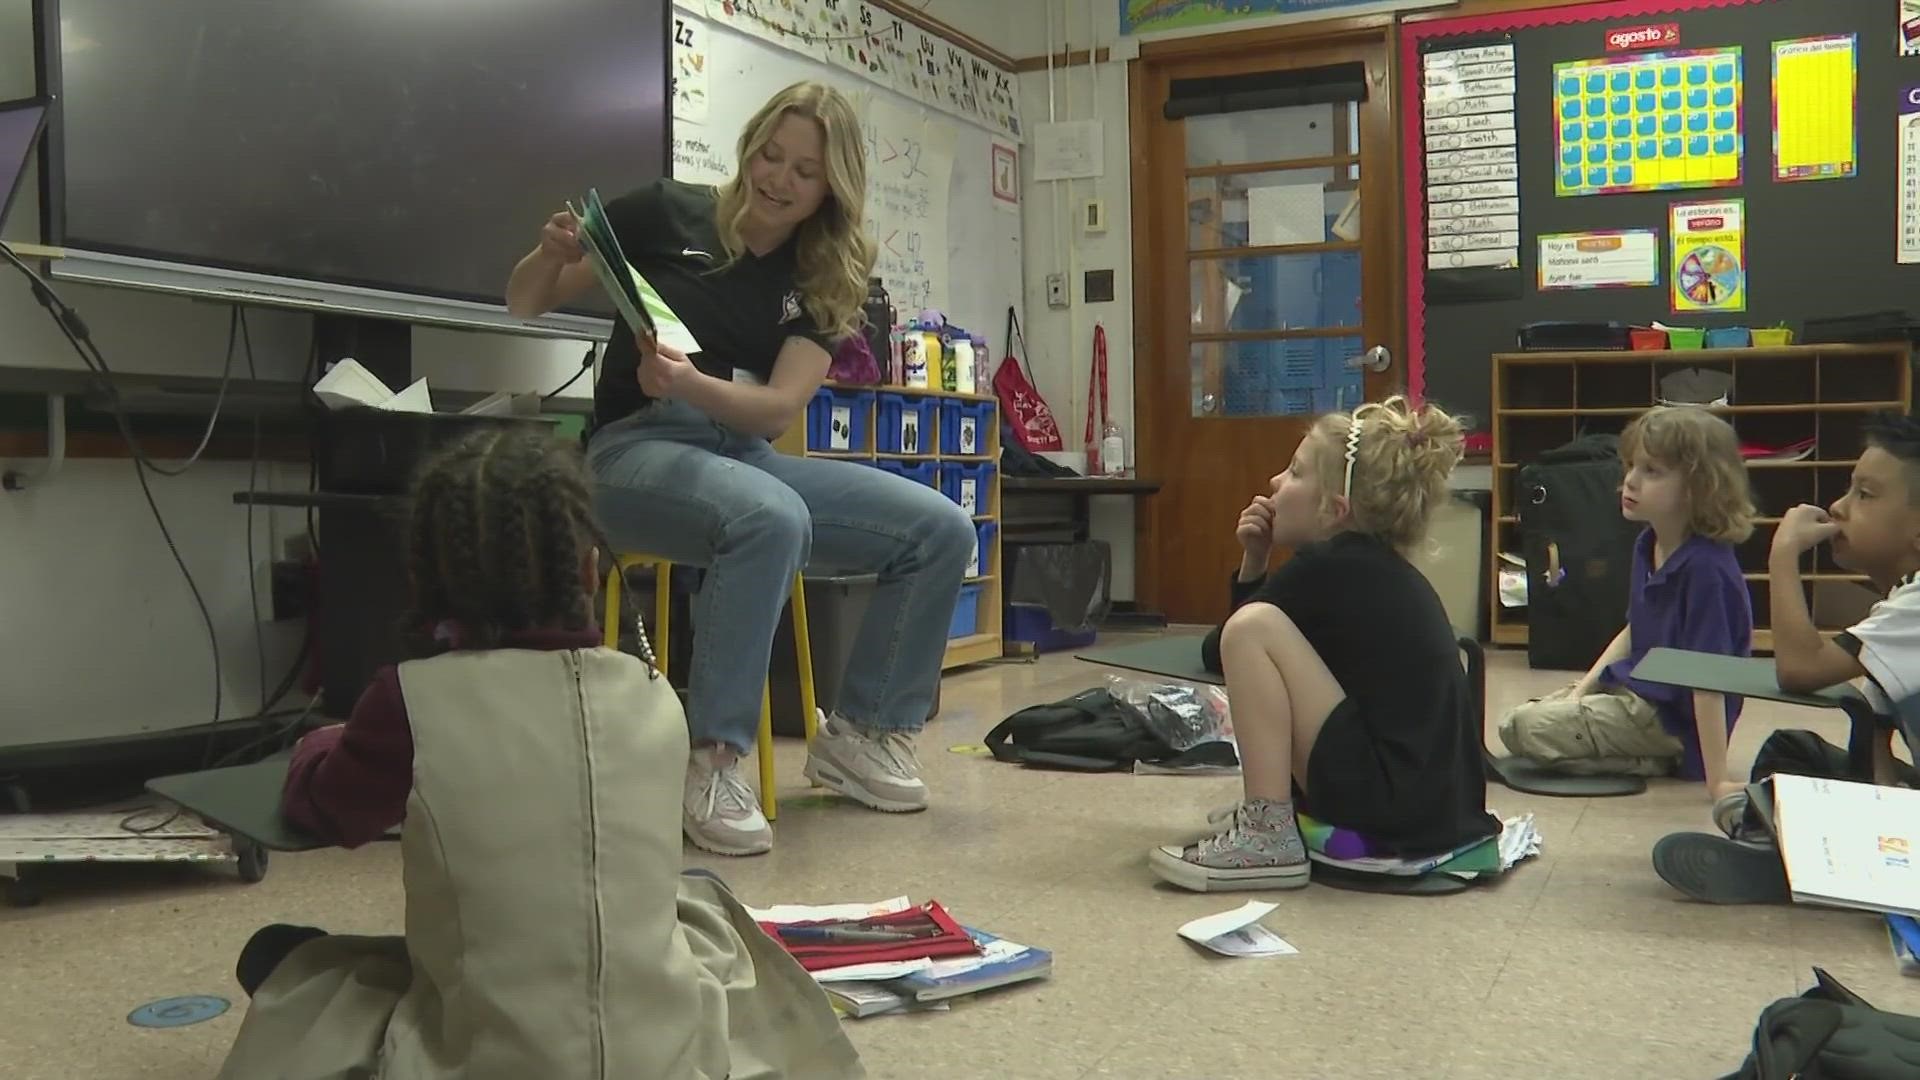 Students at a Louisville elementary school had a reason to smile thanks to some students from Bellarmine.